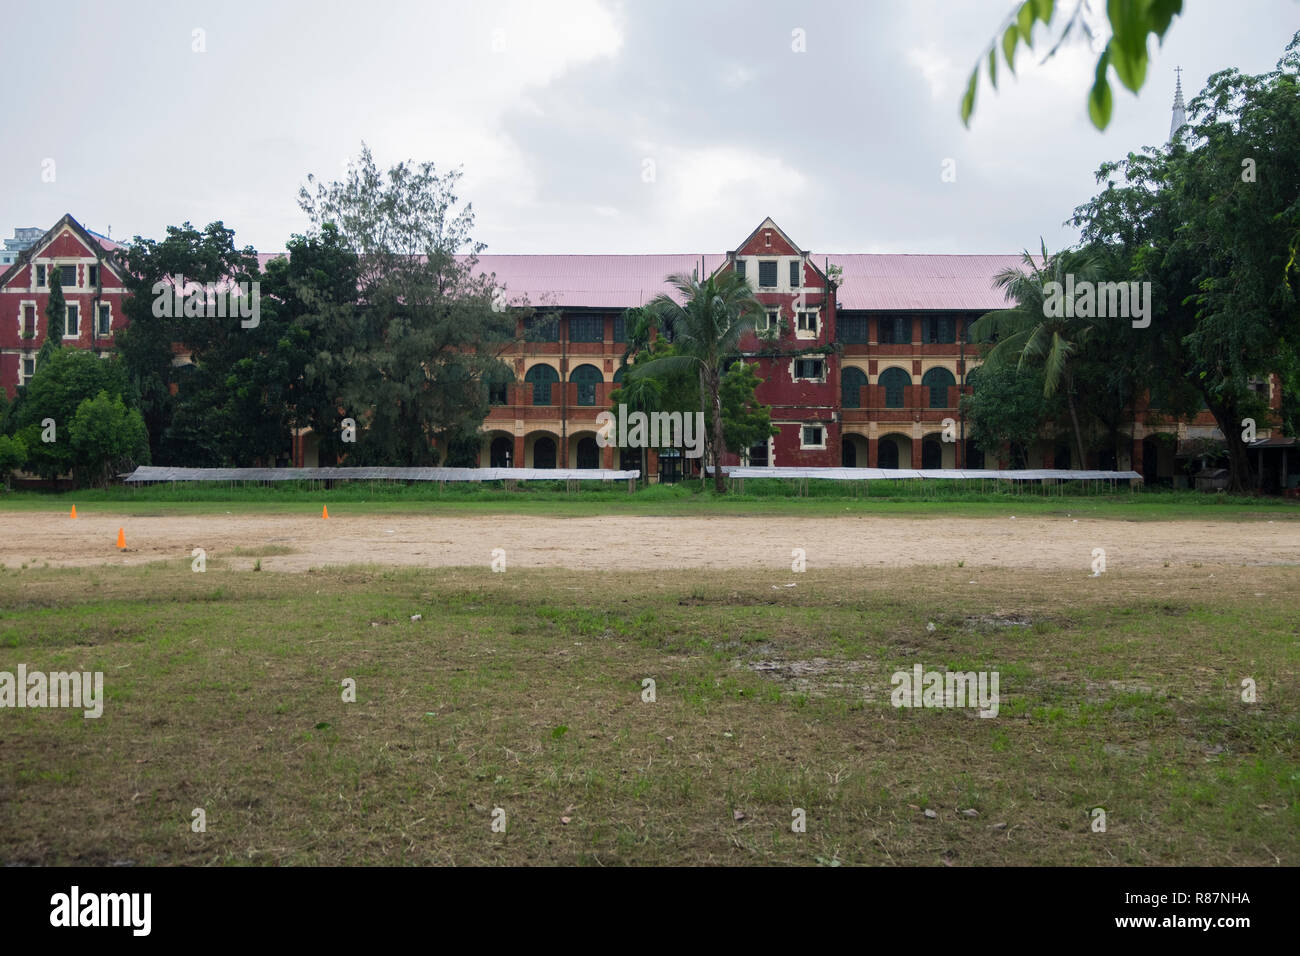 A school, an example of British Colonial Architecture in Yangon, Myanmar. Stock Photo